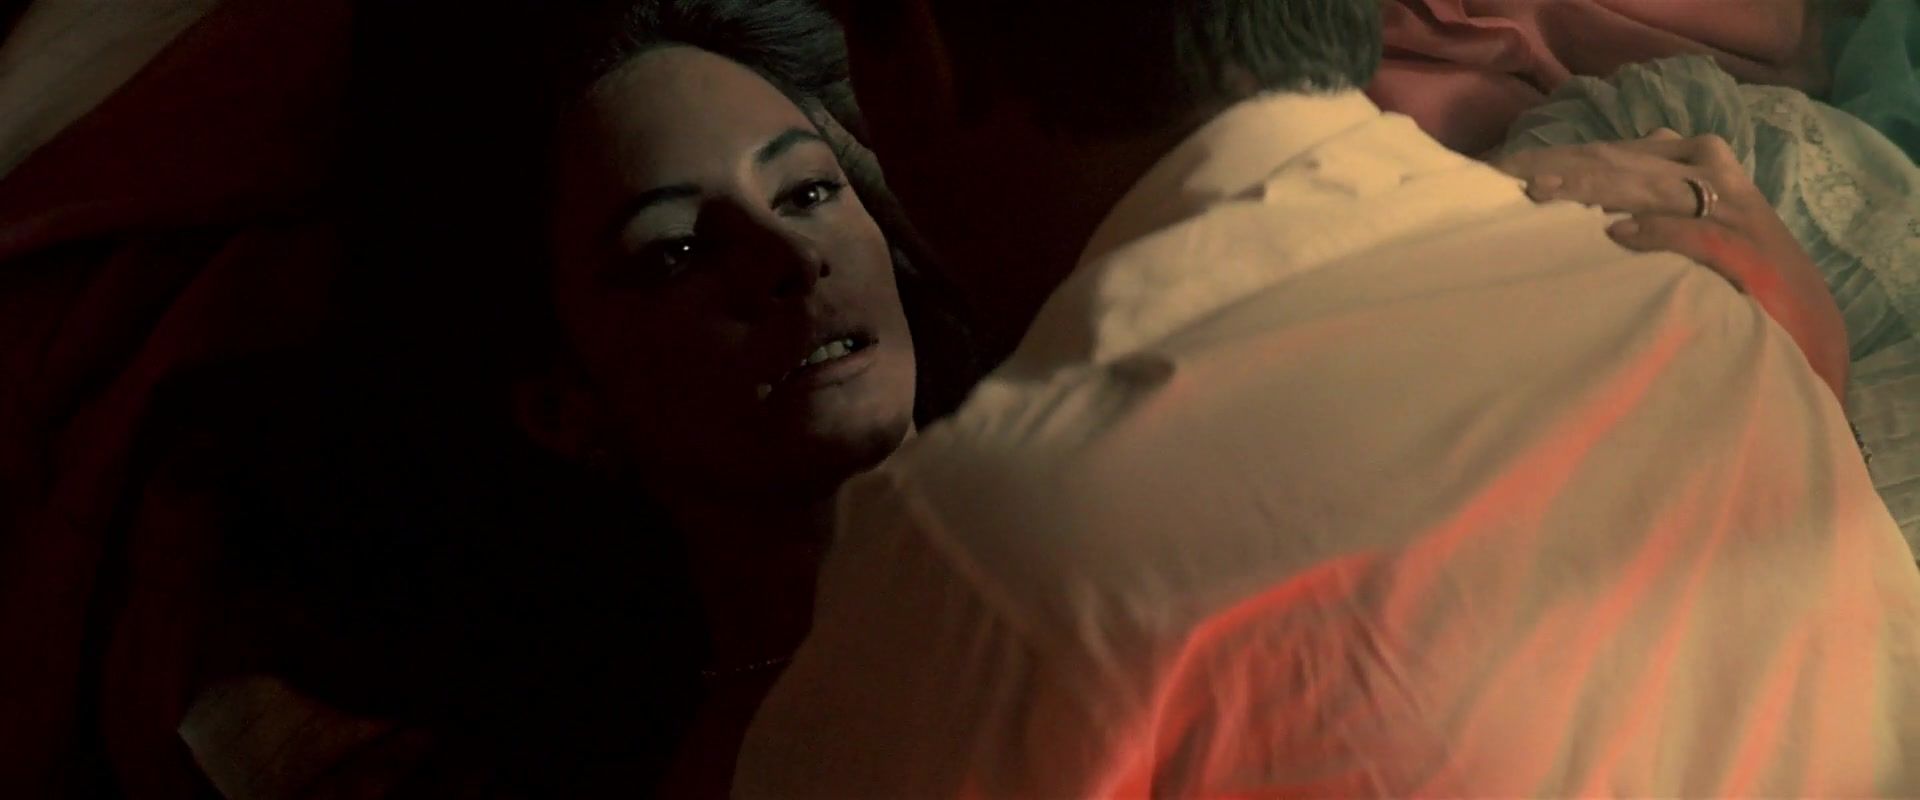 Blowjob Hot Scene with actress Madeleine Stowe | The movie "Revenge" Taiwan